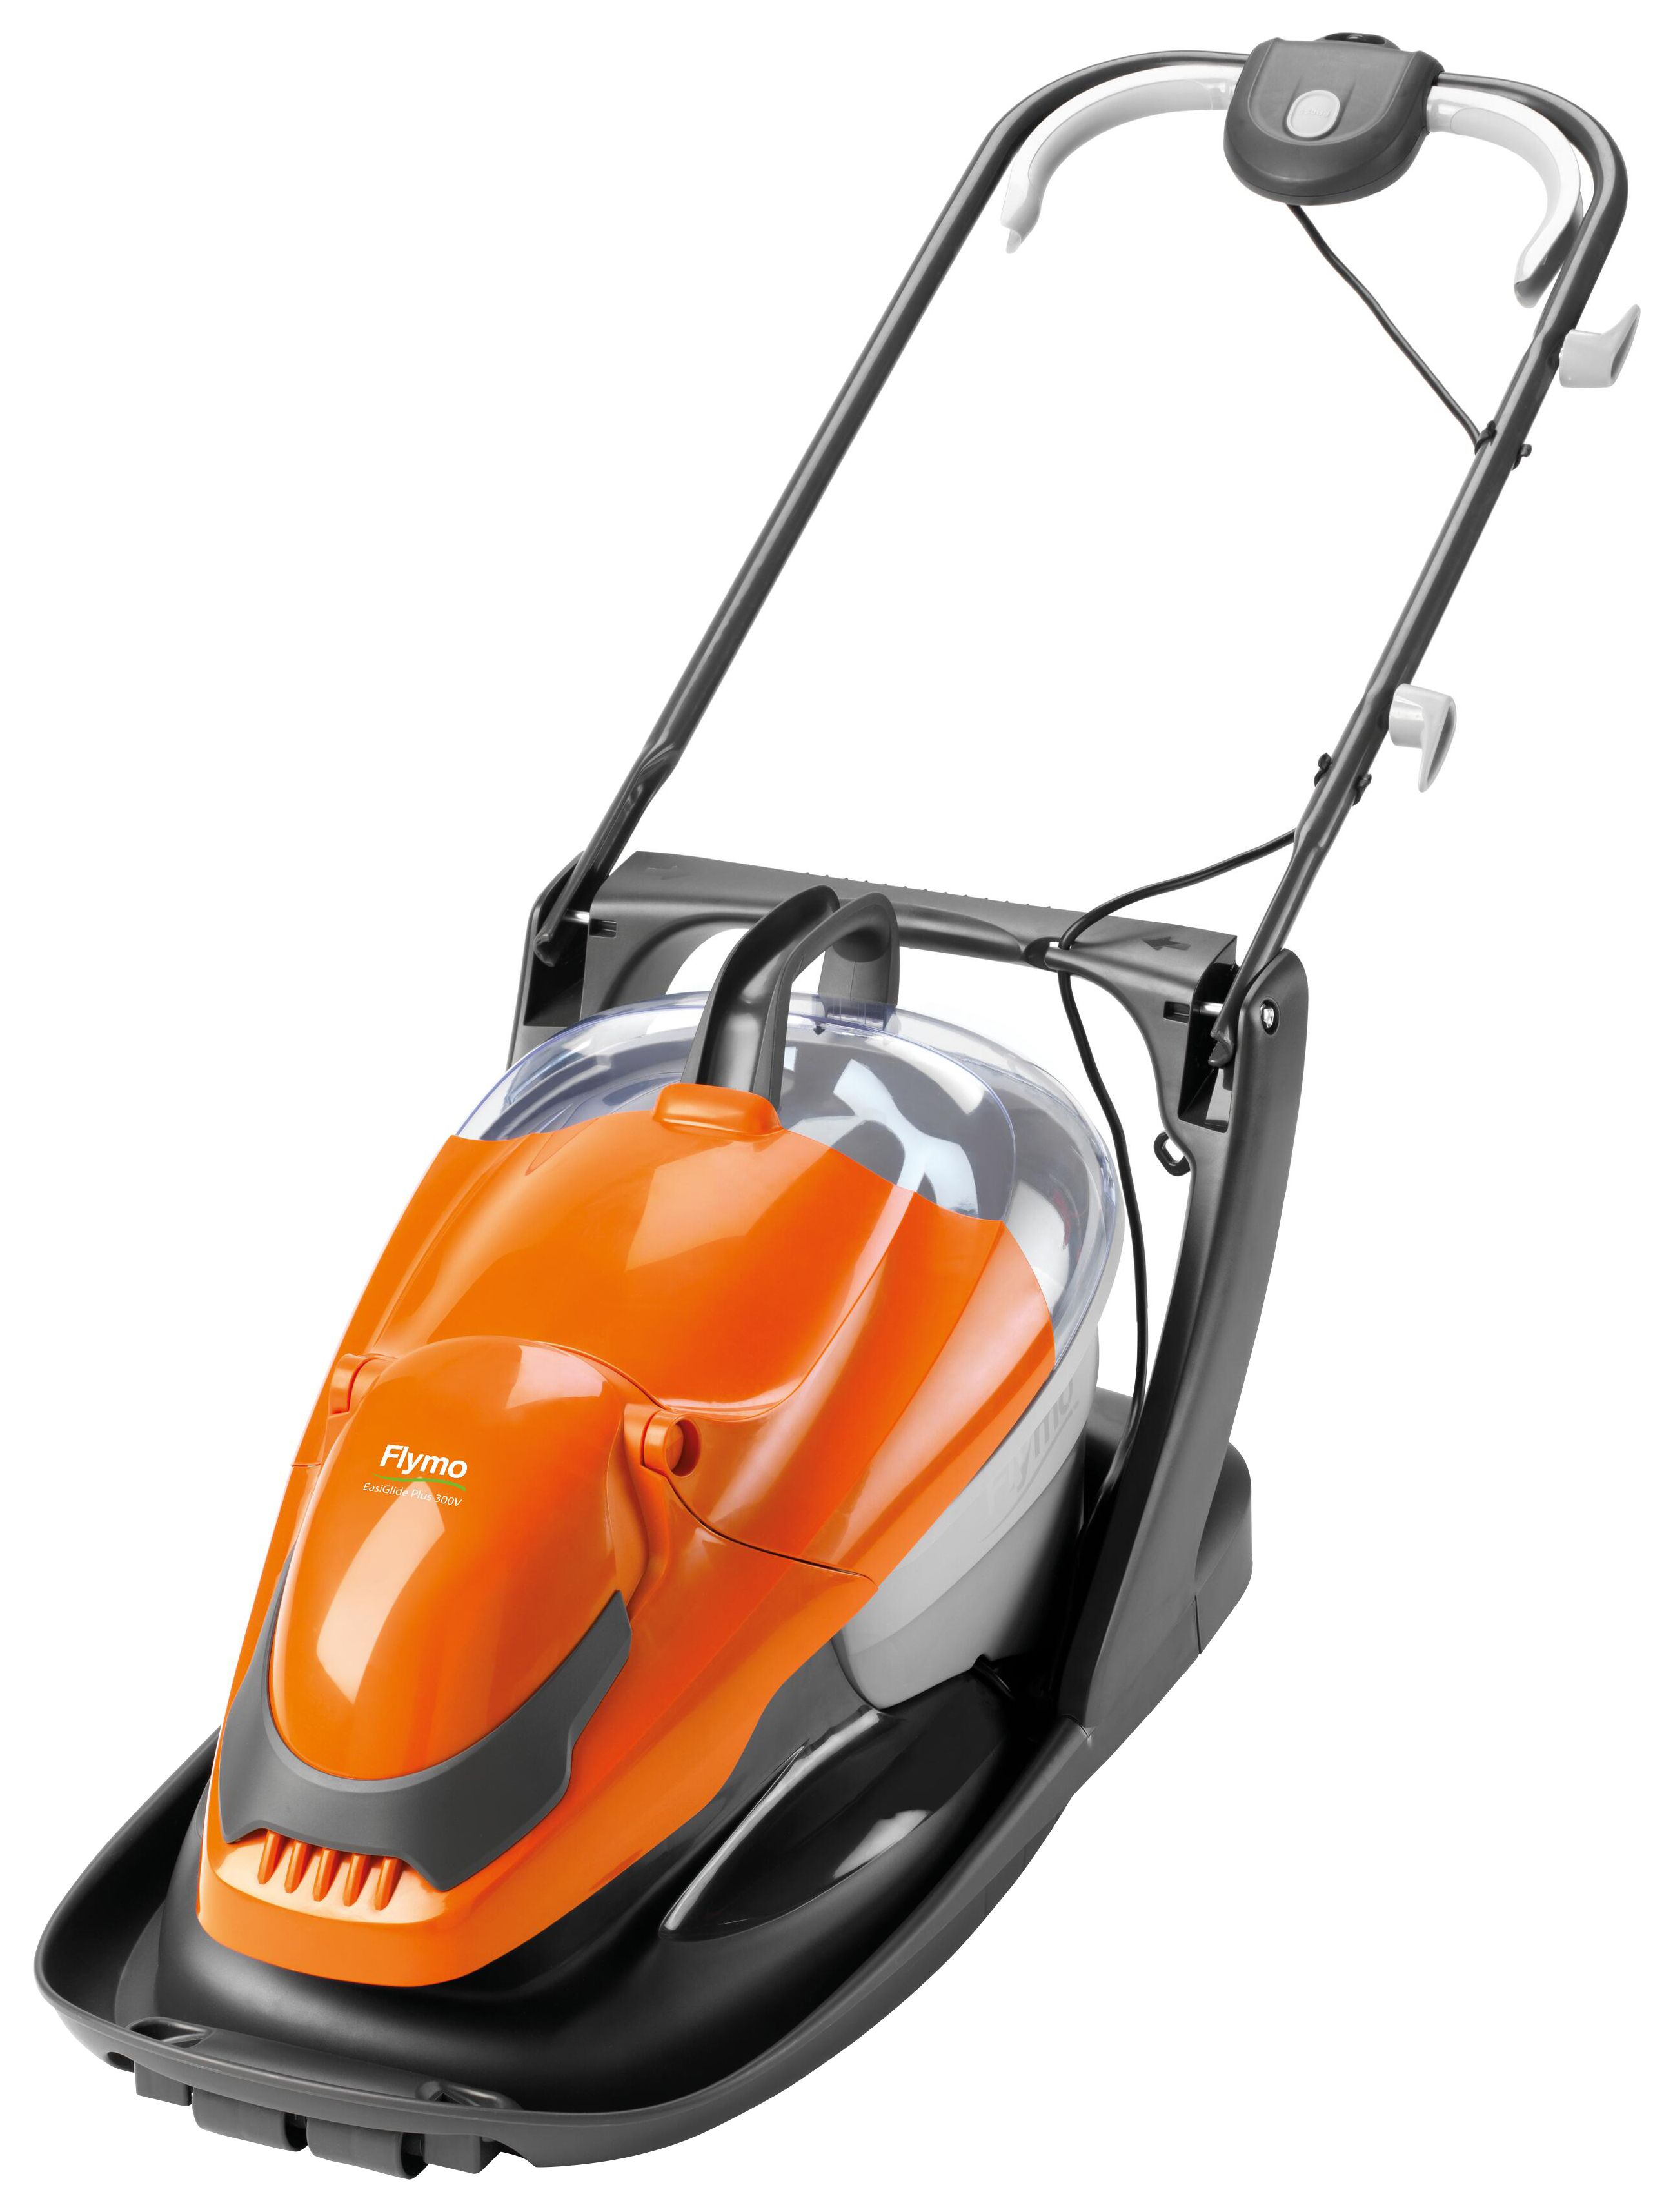 Flymo Easi Glide Plus 330V 13in Electric Hover Collect Lawn Mower - 33cm